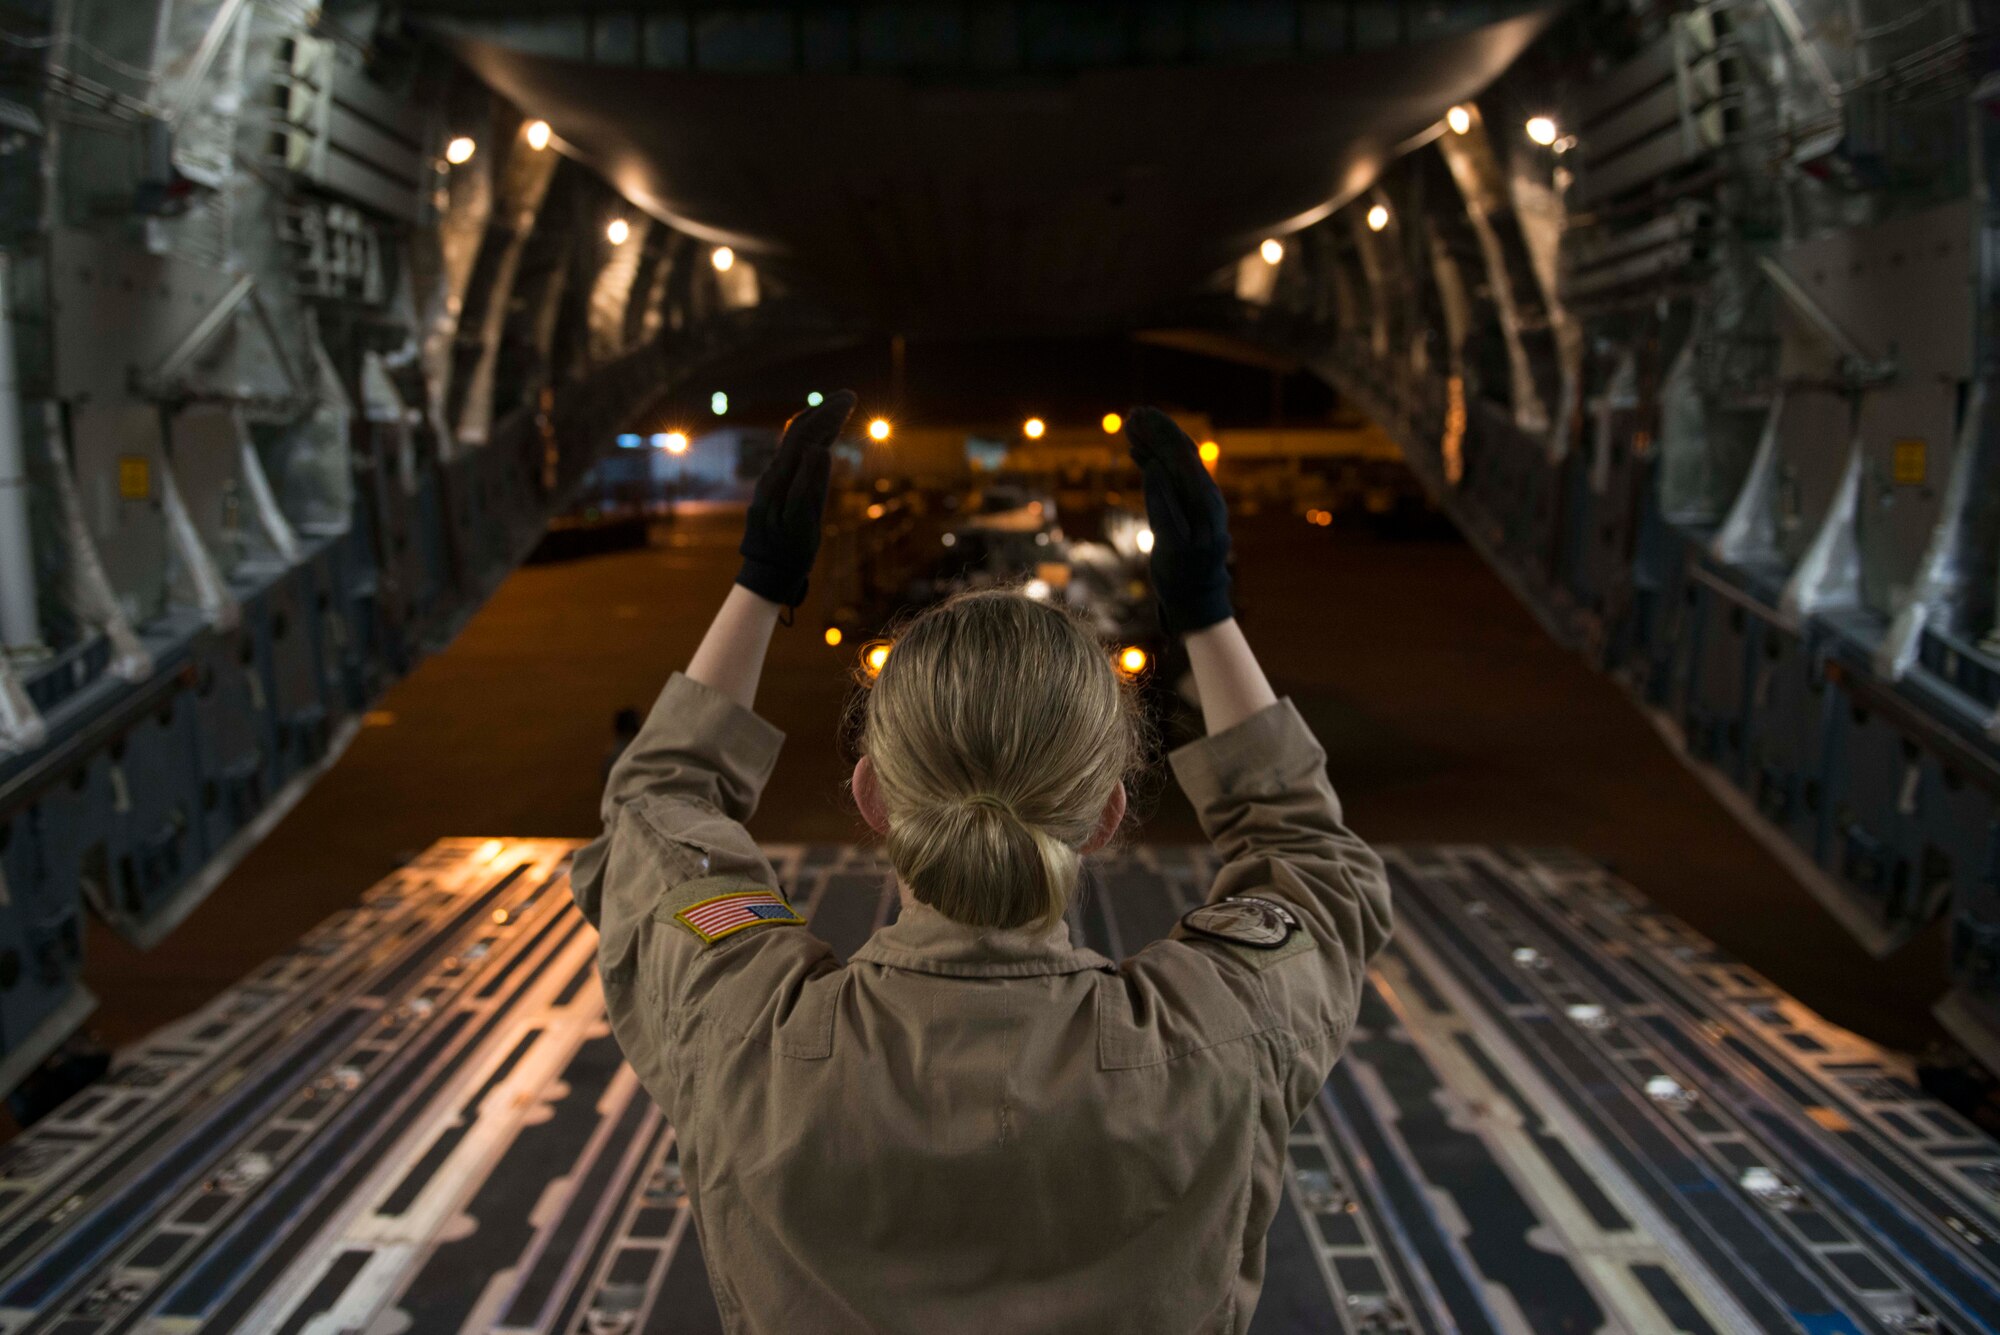 U.S. Air Force Airman 1st Class Tayler Gardner, 7th Airlift Squadron loadmaster, guides a 60K loader toward the back of a C-17 Globemaster III Oct. 21, 2016, at Incirlik Air Base, Turkey. Loadmasters supervise the loading and unloading of cargo and personnel on the aircraft. (U.S. Air Force photo by Senior Airman John Nieves Camacho)